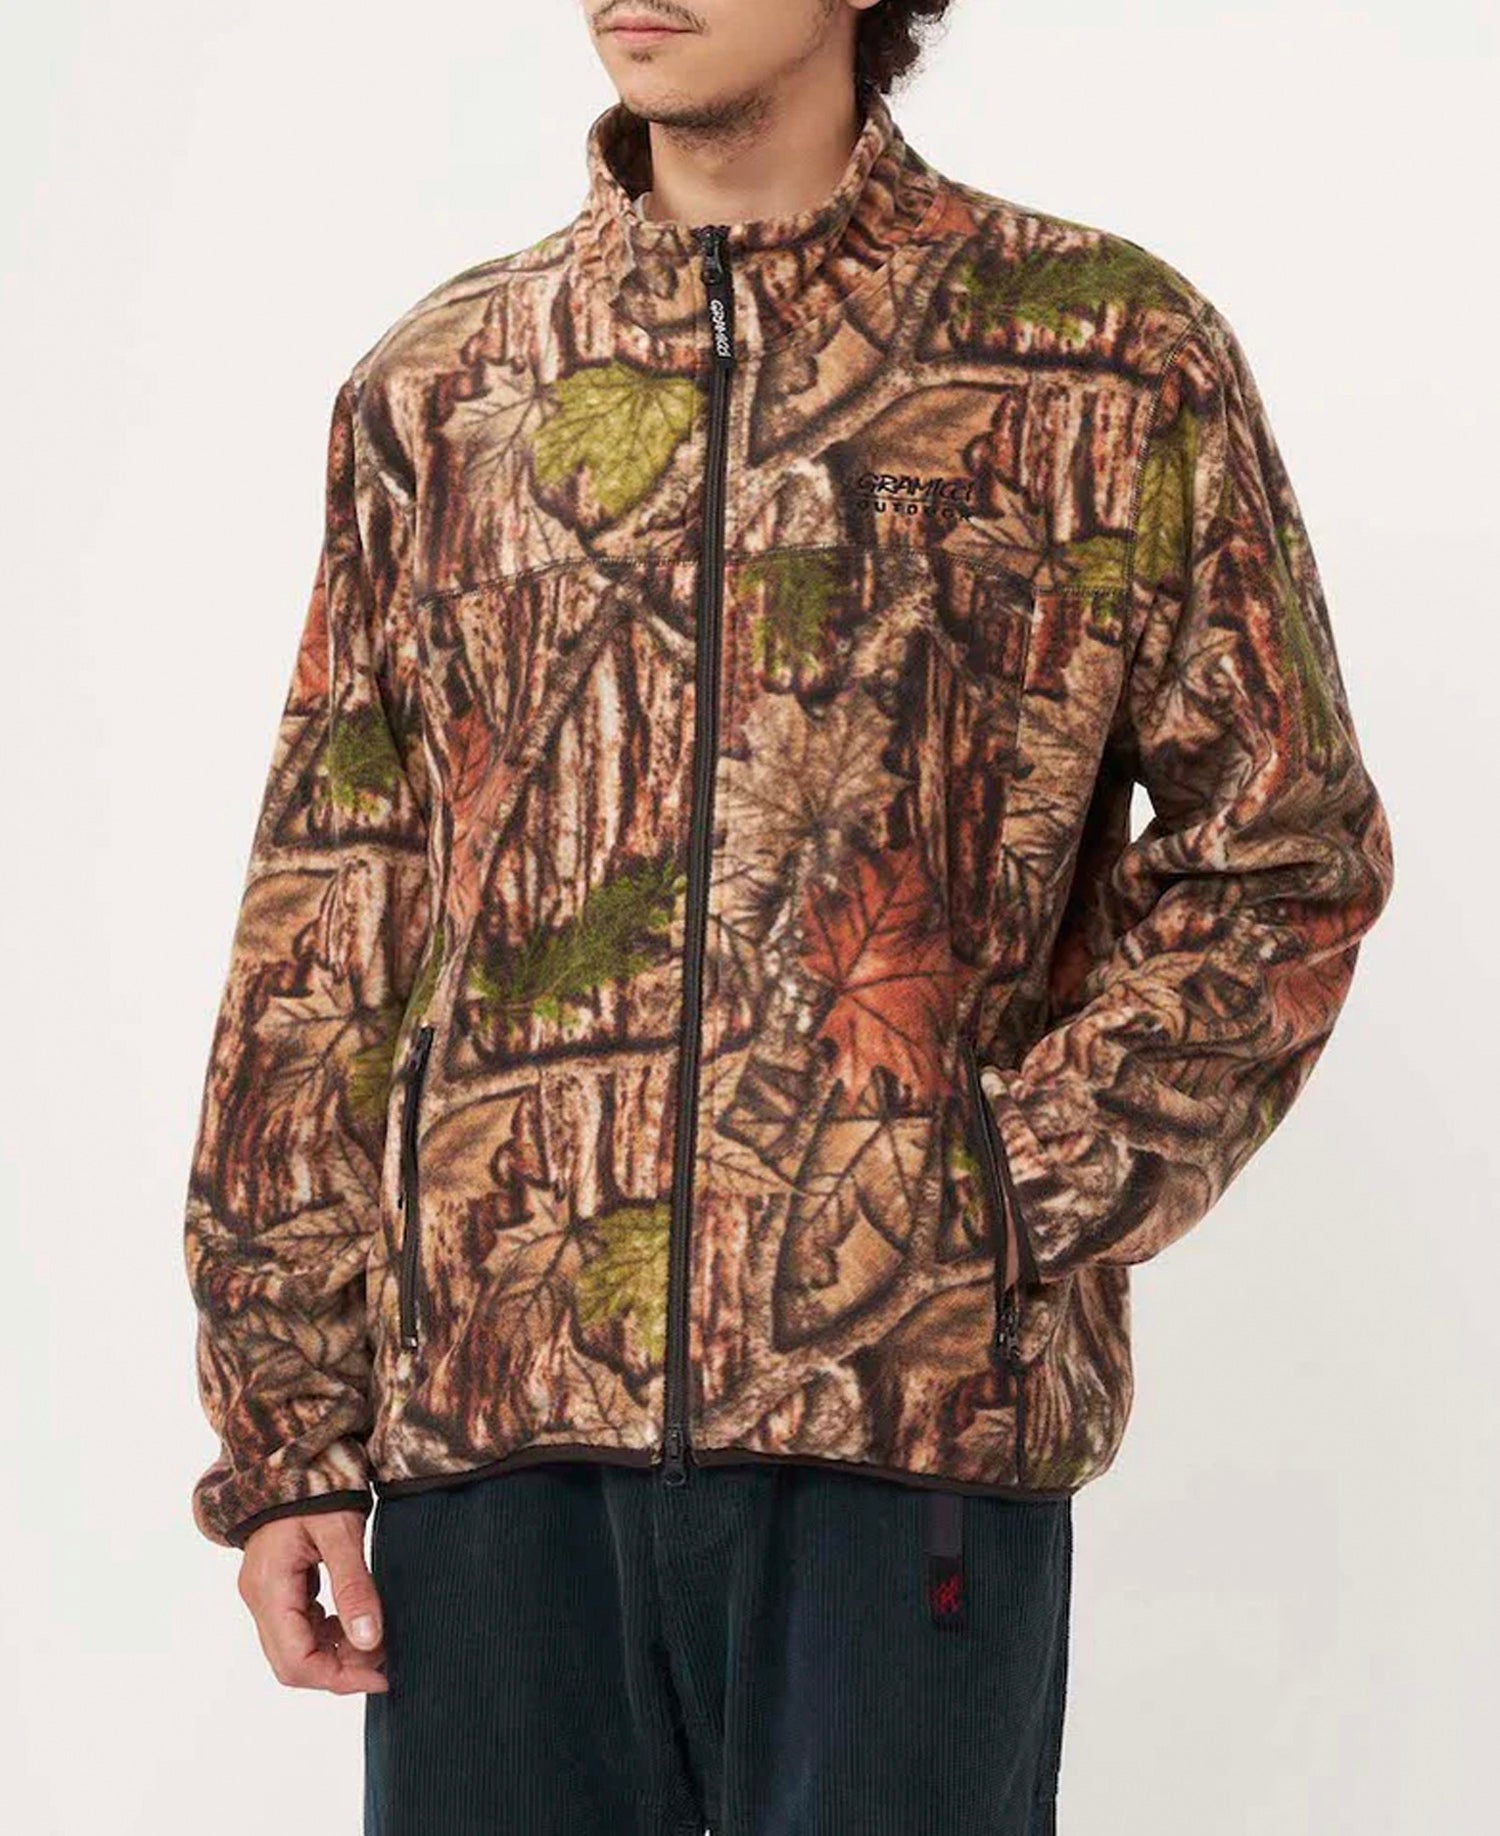 Gramicci Thermal Fleece Jacket - Leaf Camo – Stomping Ground